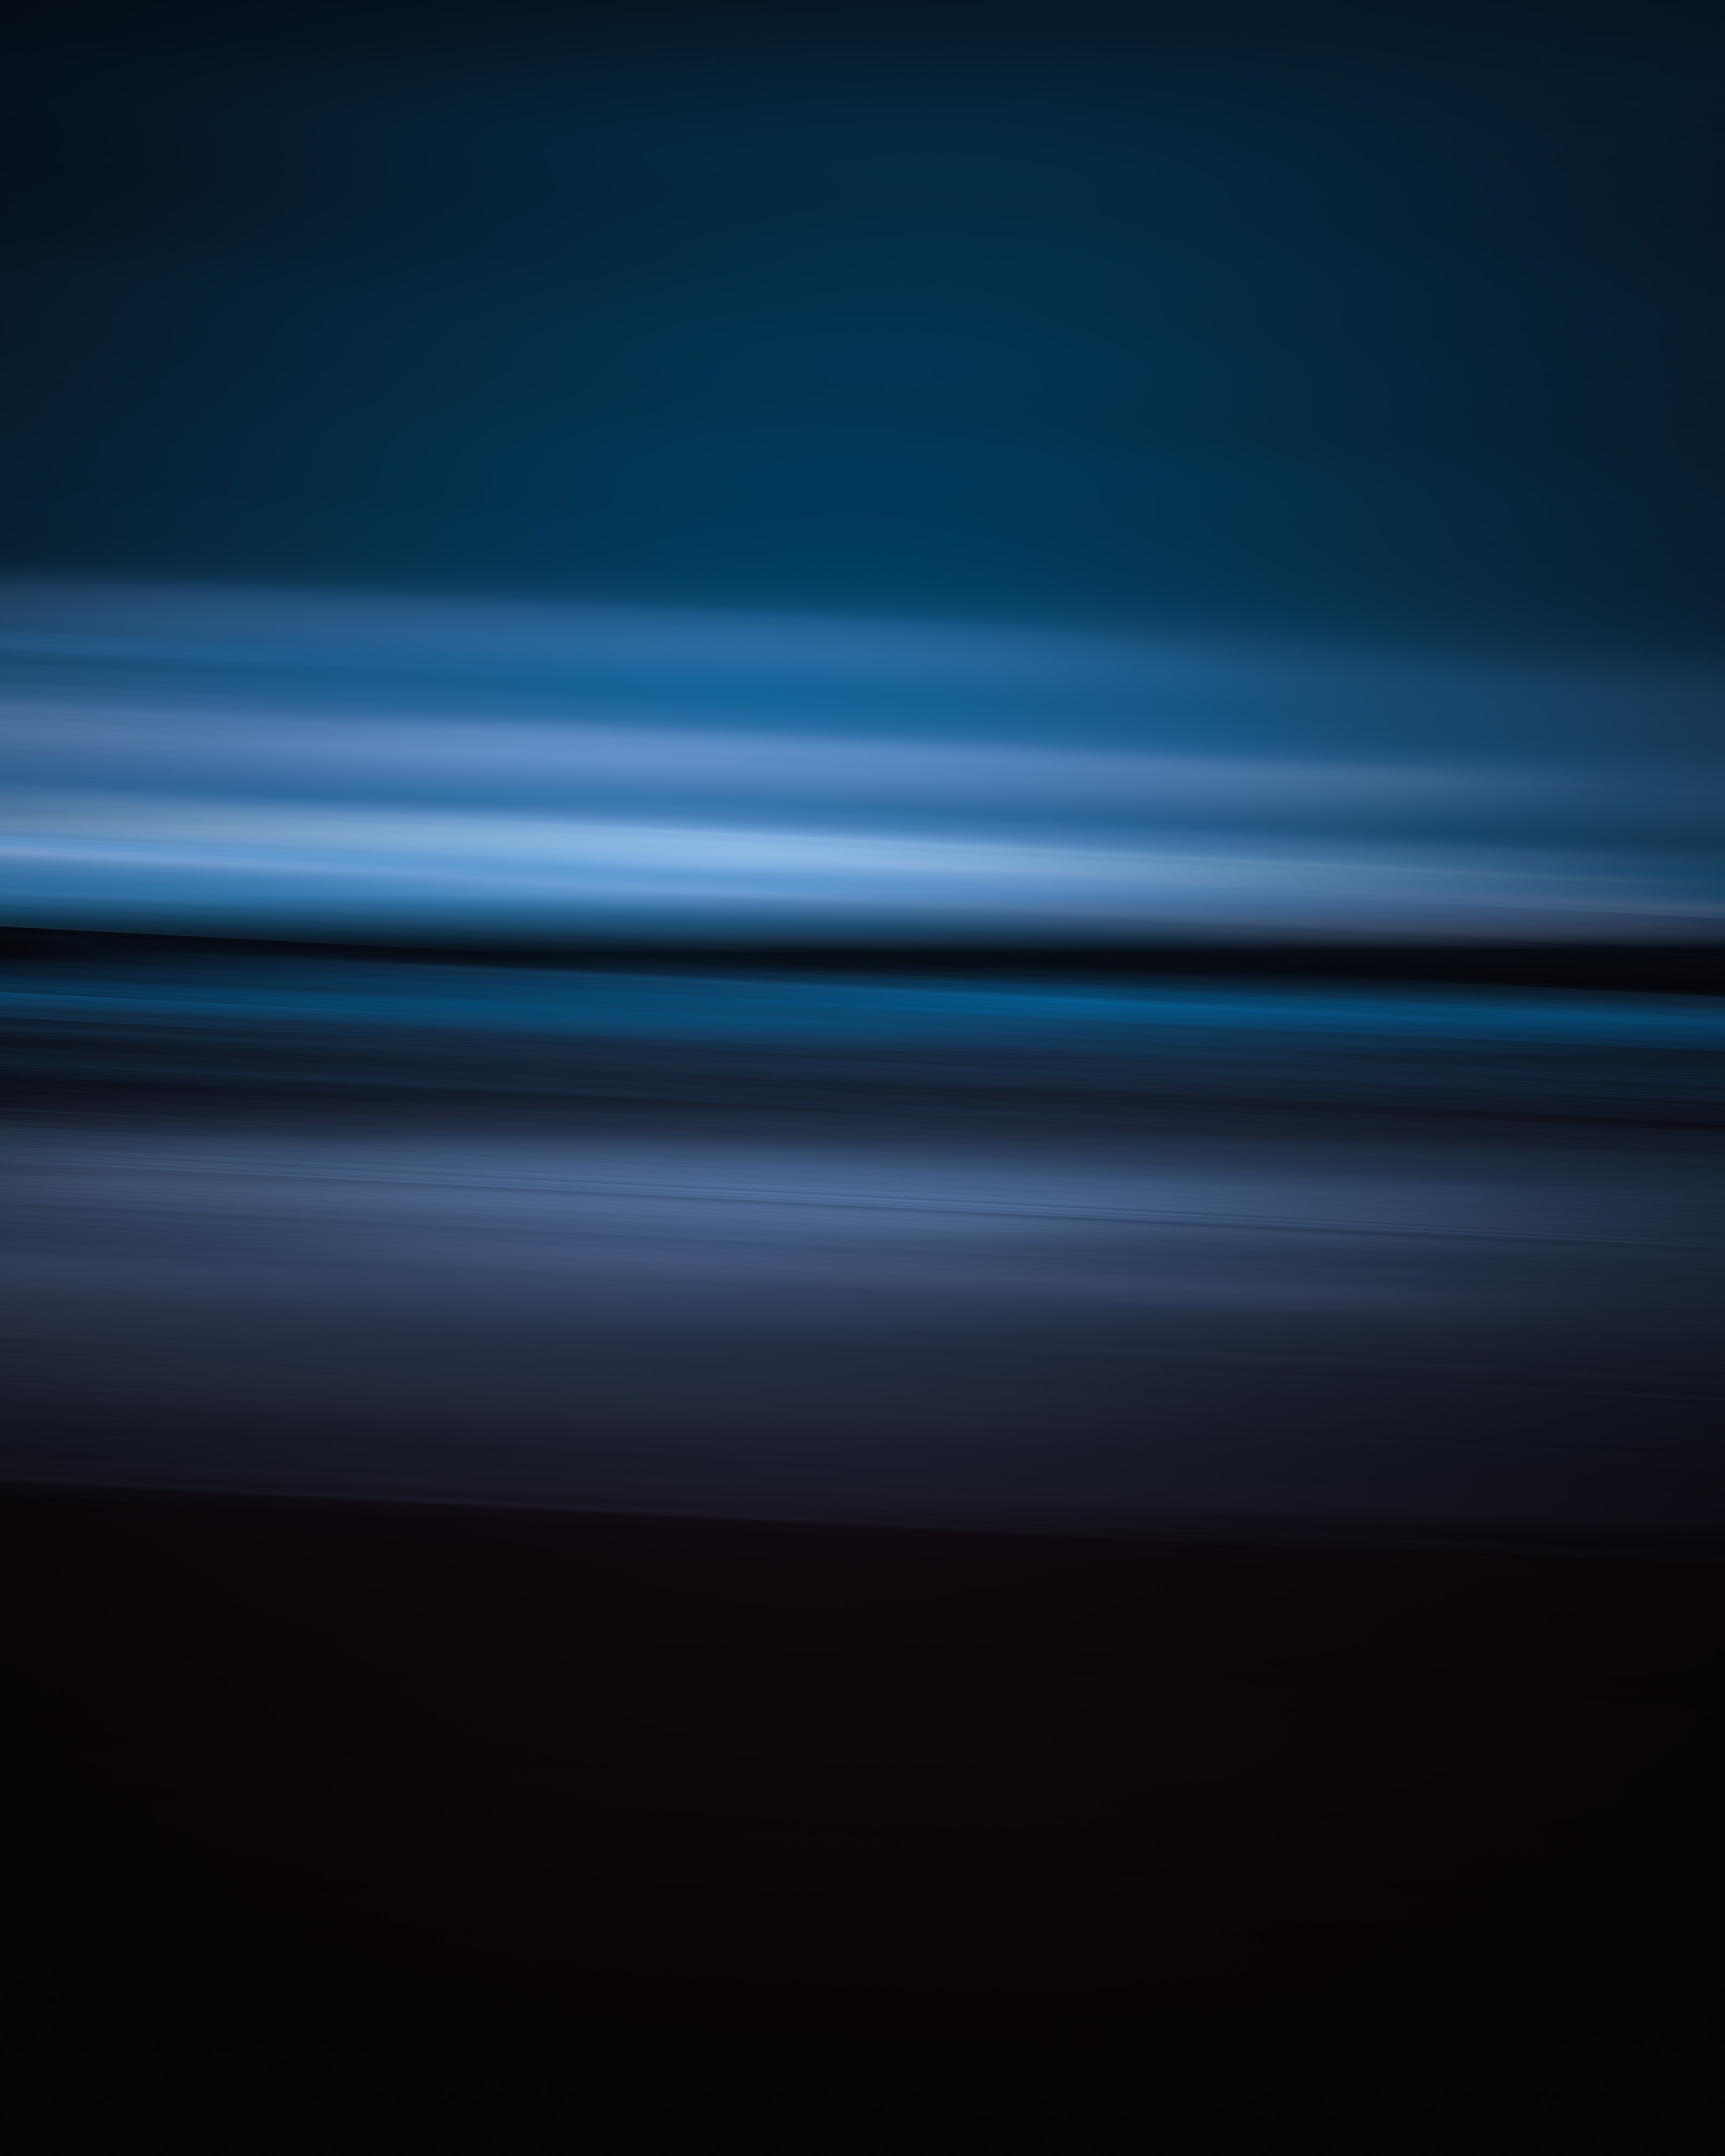 blur, streaks, stripes, blue, abstract, smooth, distortion